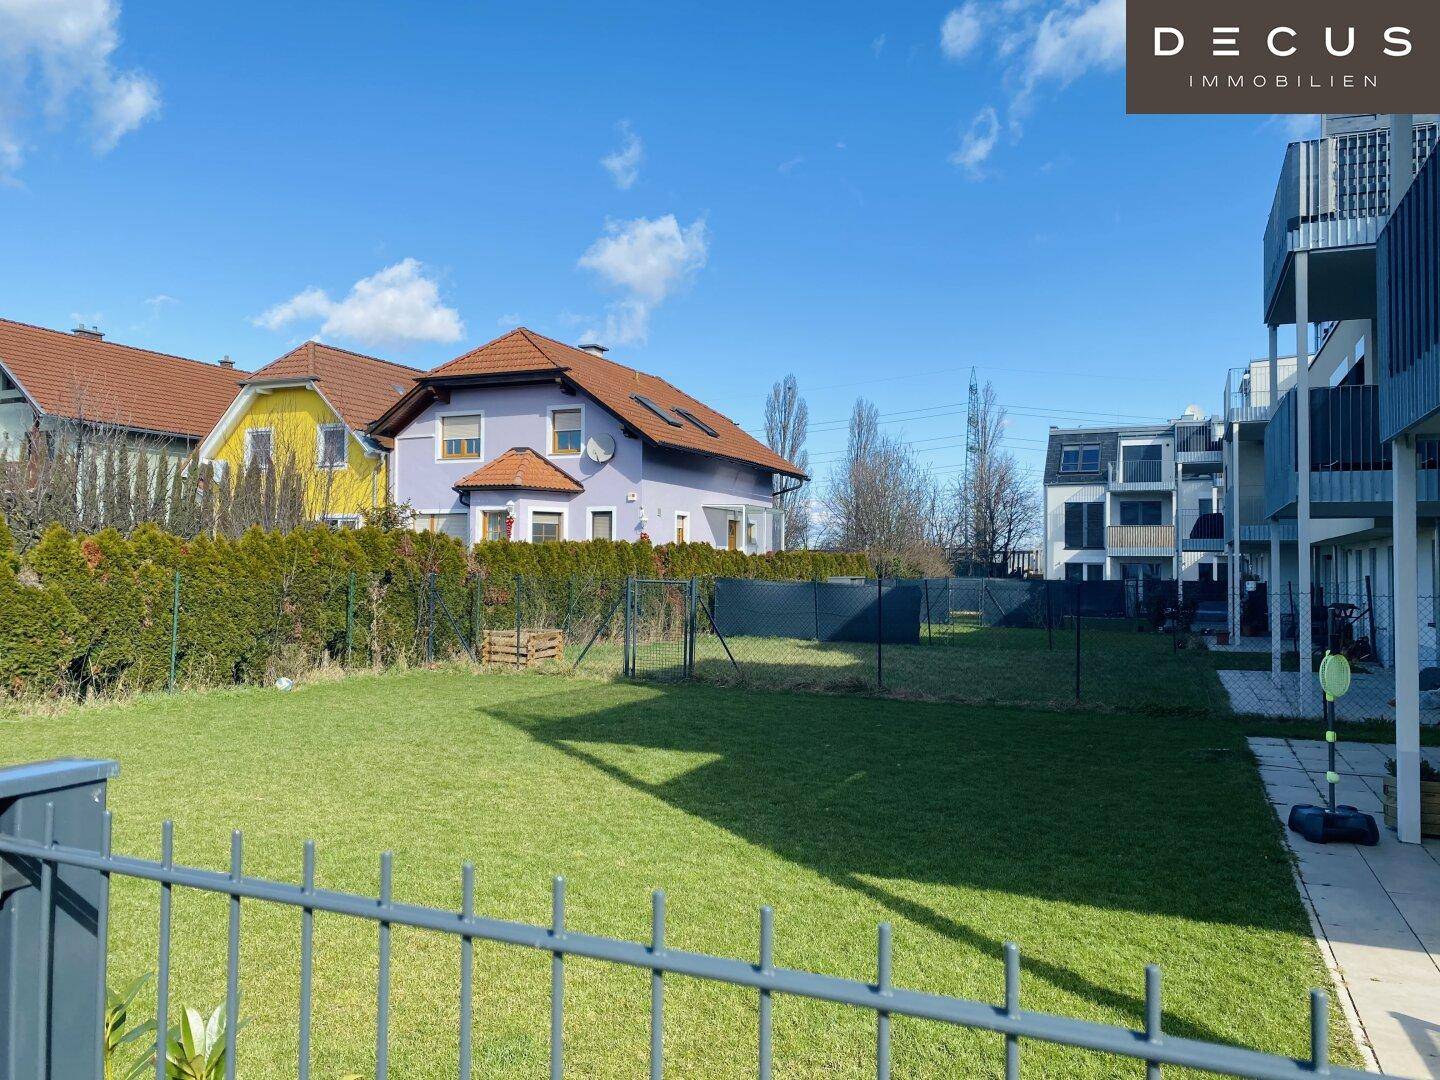 https://pictures.immobilienscout24.de/prod.www.immobilienscout24.at/pictureserver/loadPicture?q=70&id=012.0012000001E844n-1664957970-40feaeb85adc449798eea1896f50884a